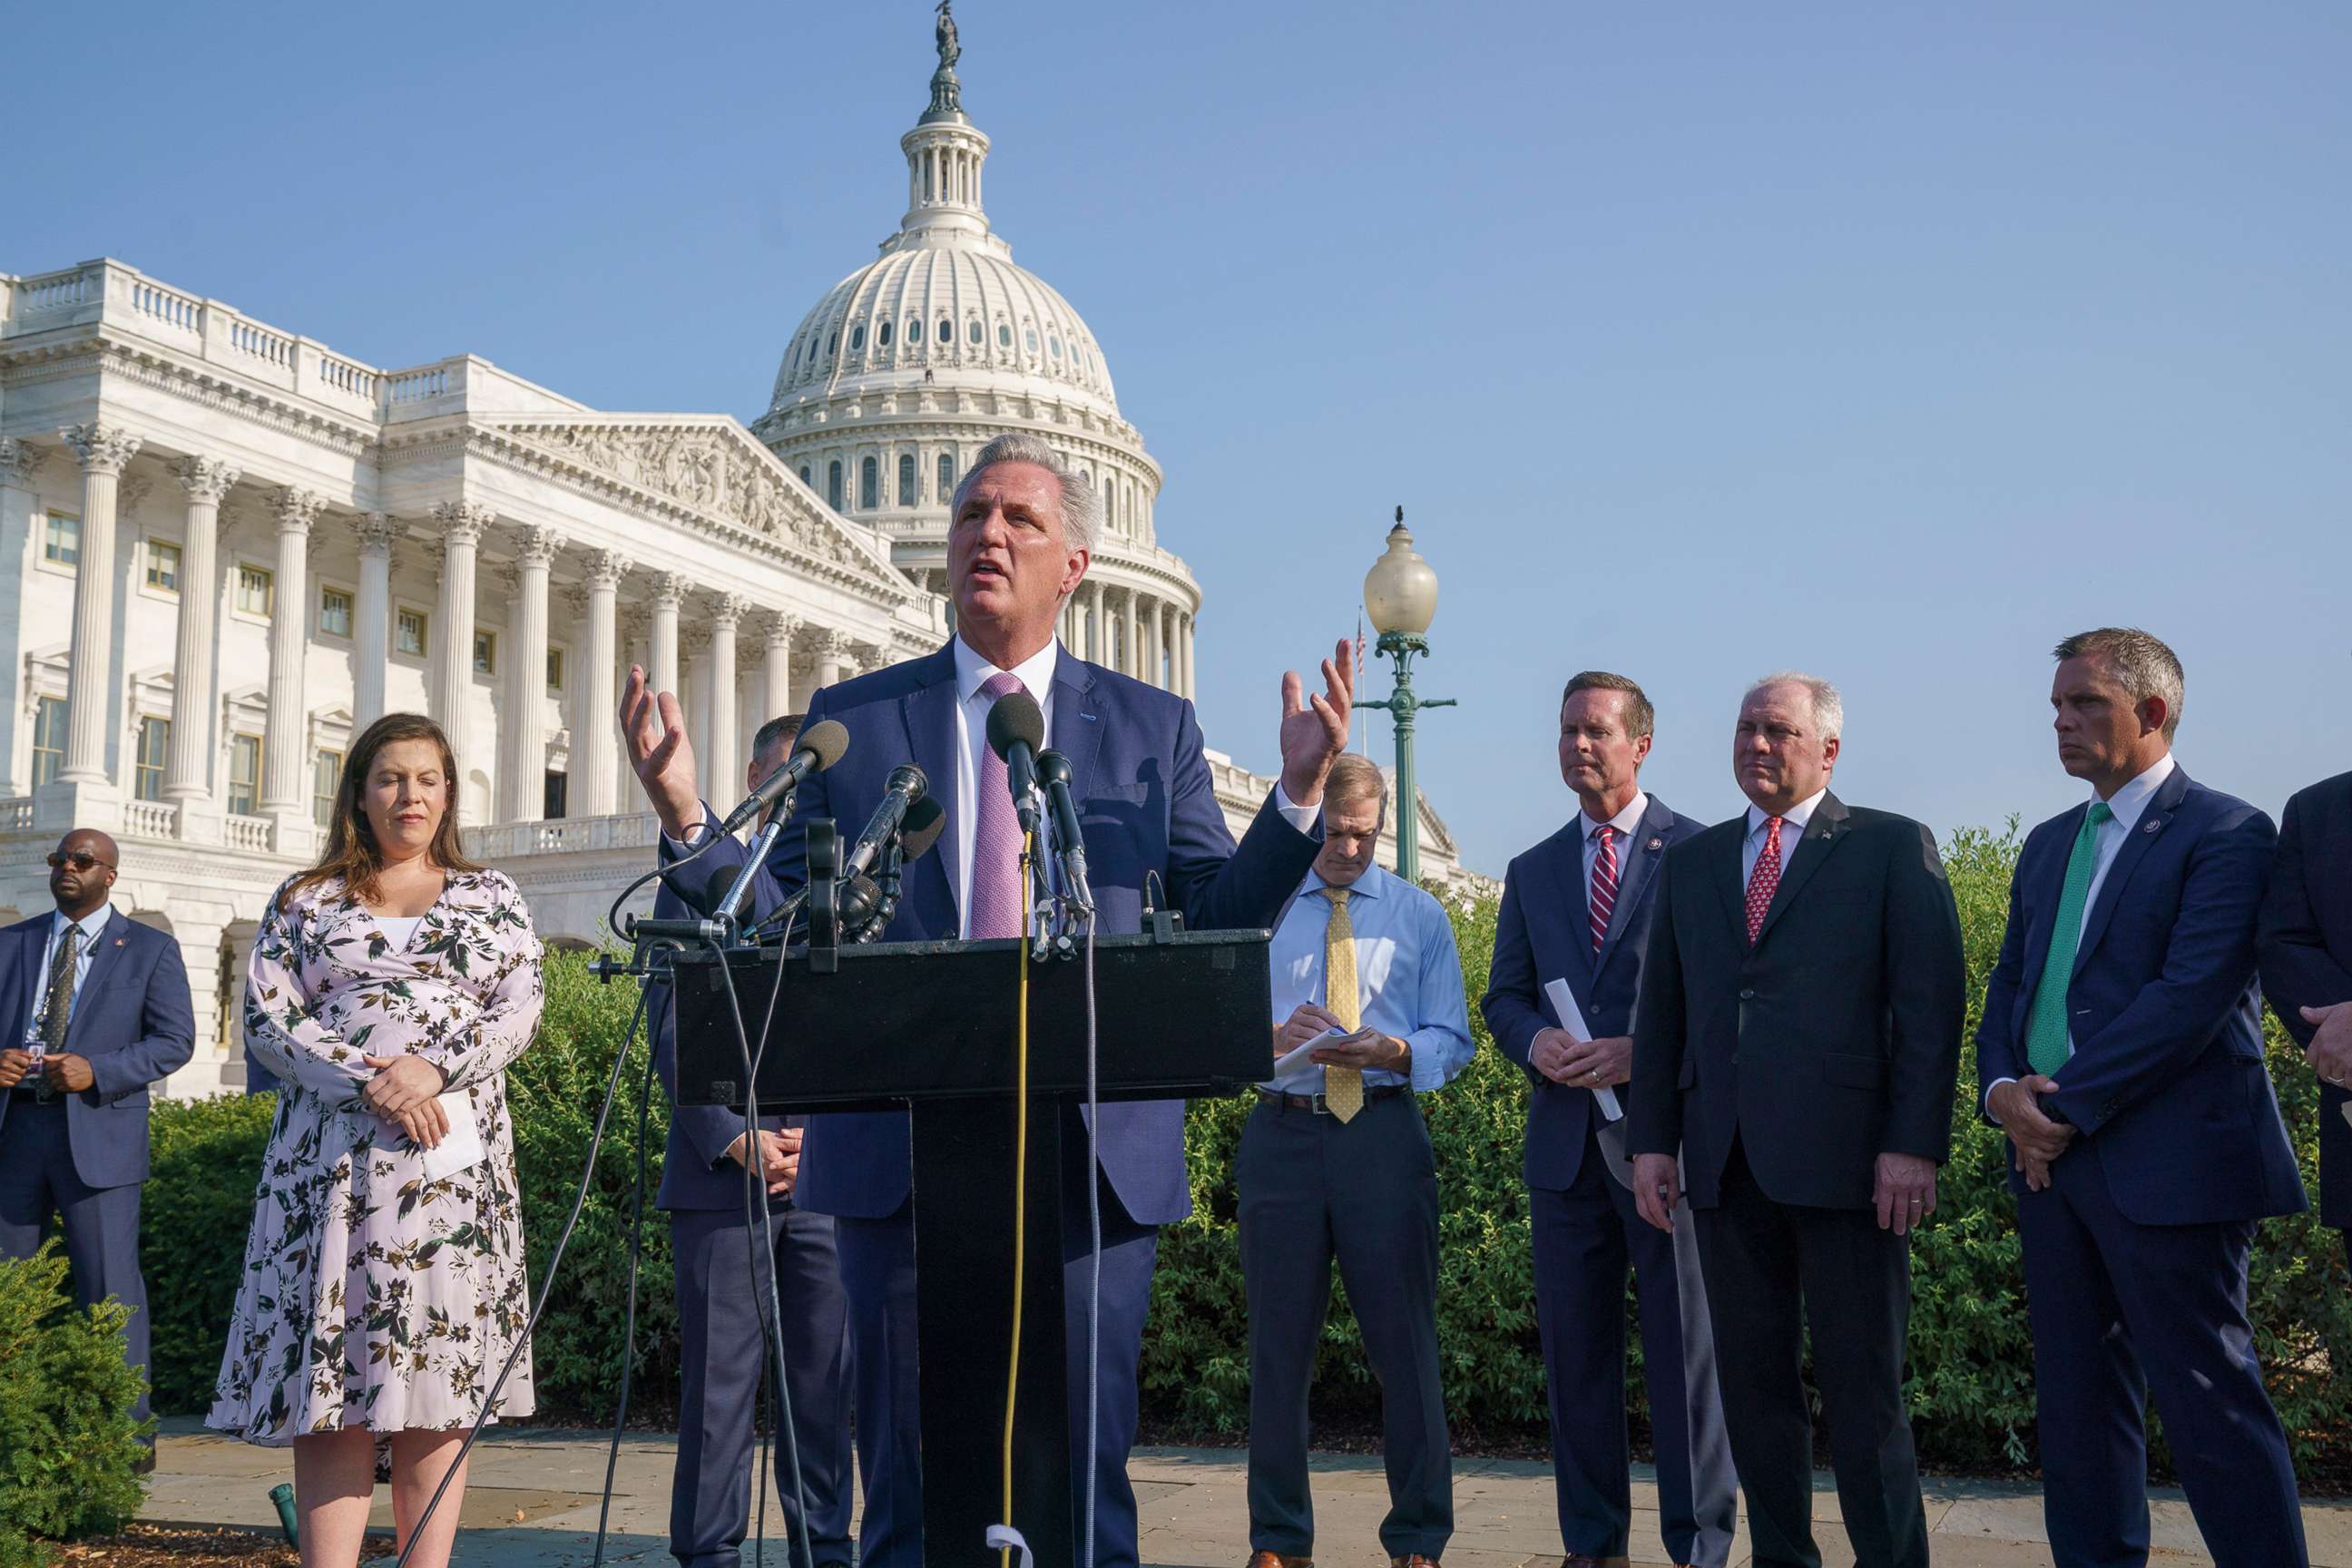 PHOTO: House Minority Leader Kevin McCarthy, joined by Republican lawmakers, holds a news conference before the start of a hearing by a select committee on the Jan. 6 insurrection, at the Capitol in Washington, July 27, 2021.